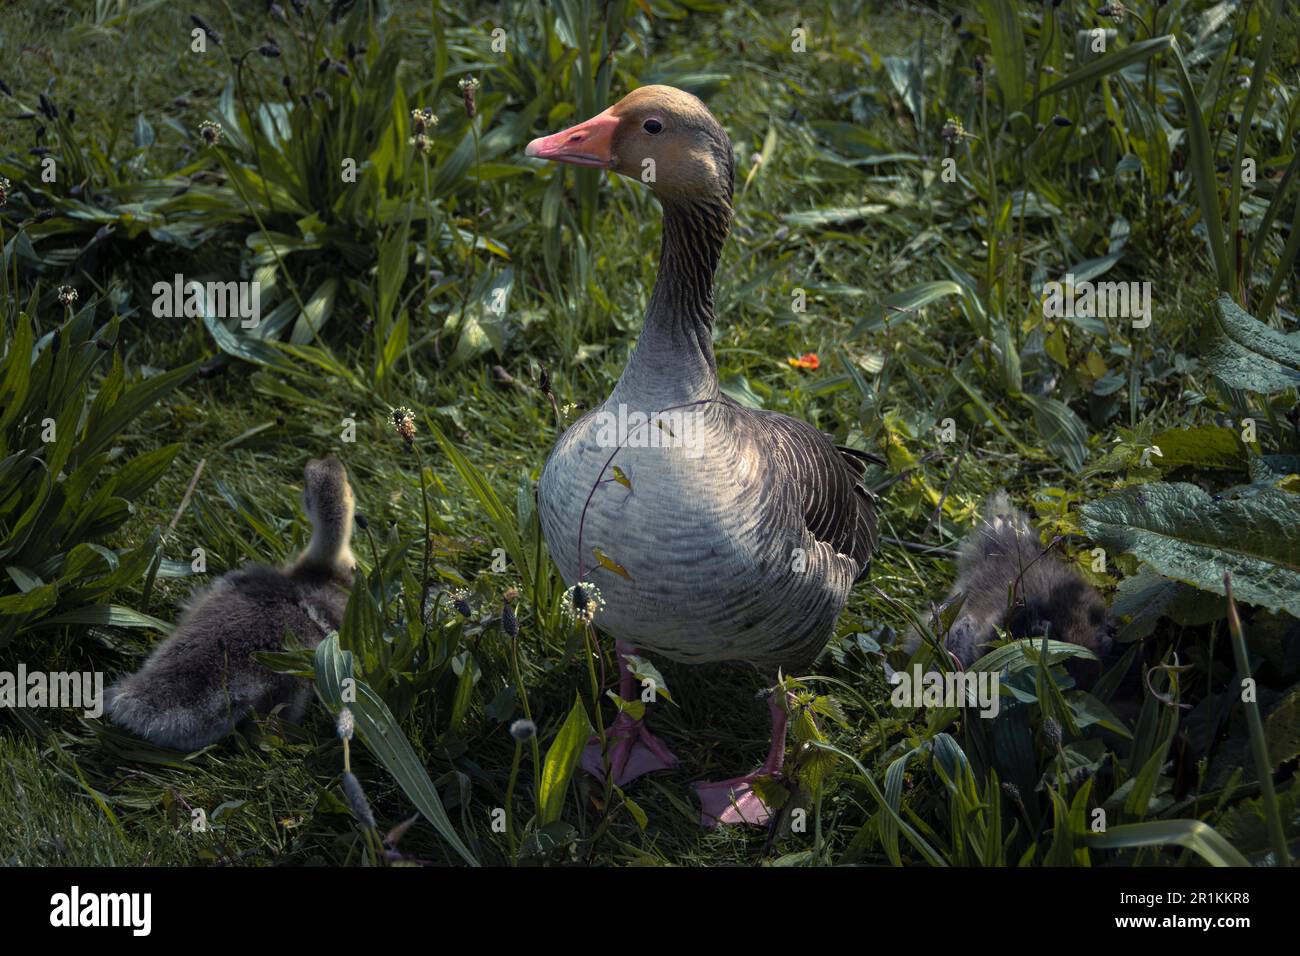 Greylag Goose with young goslings. wild geese native to the UK and Europe Stock Photo